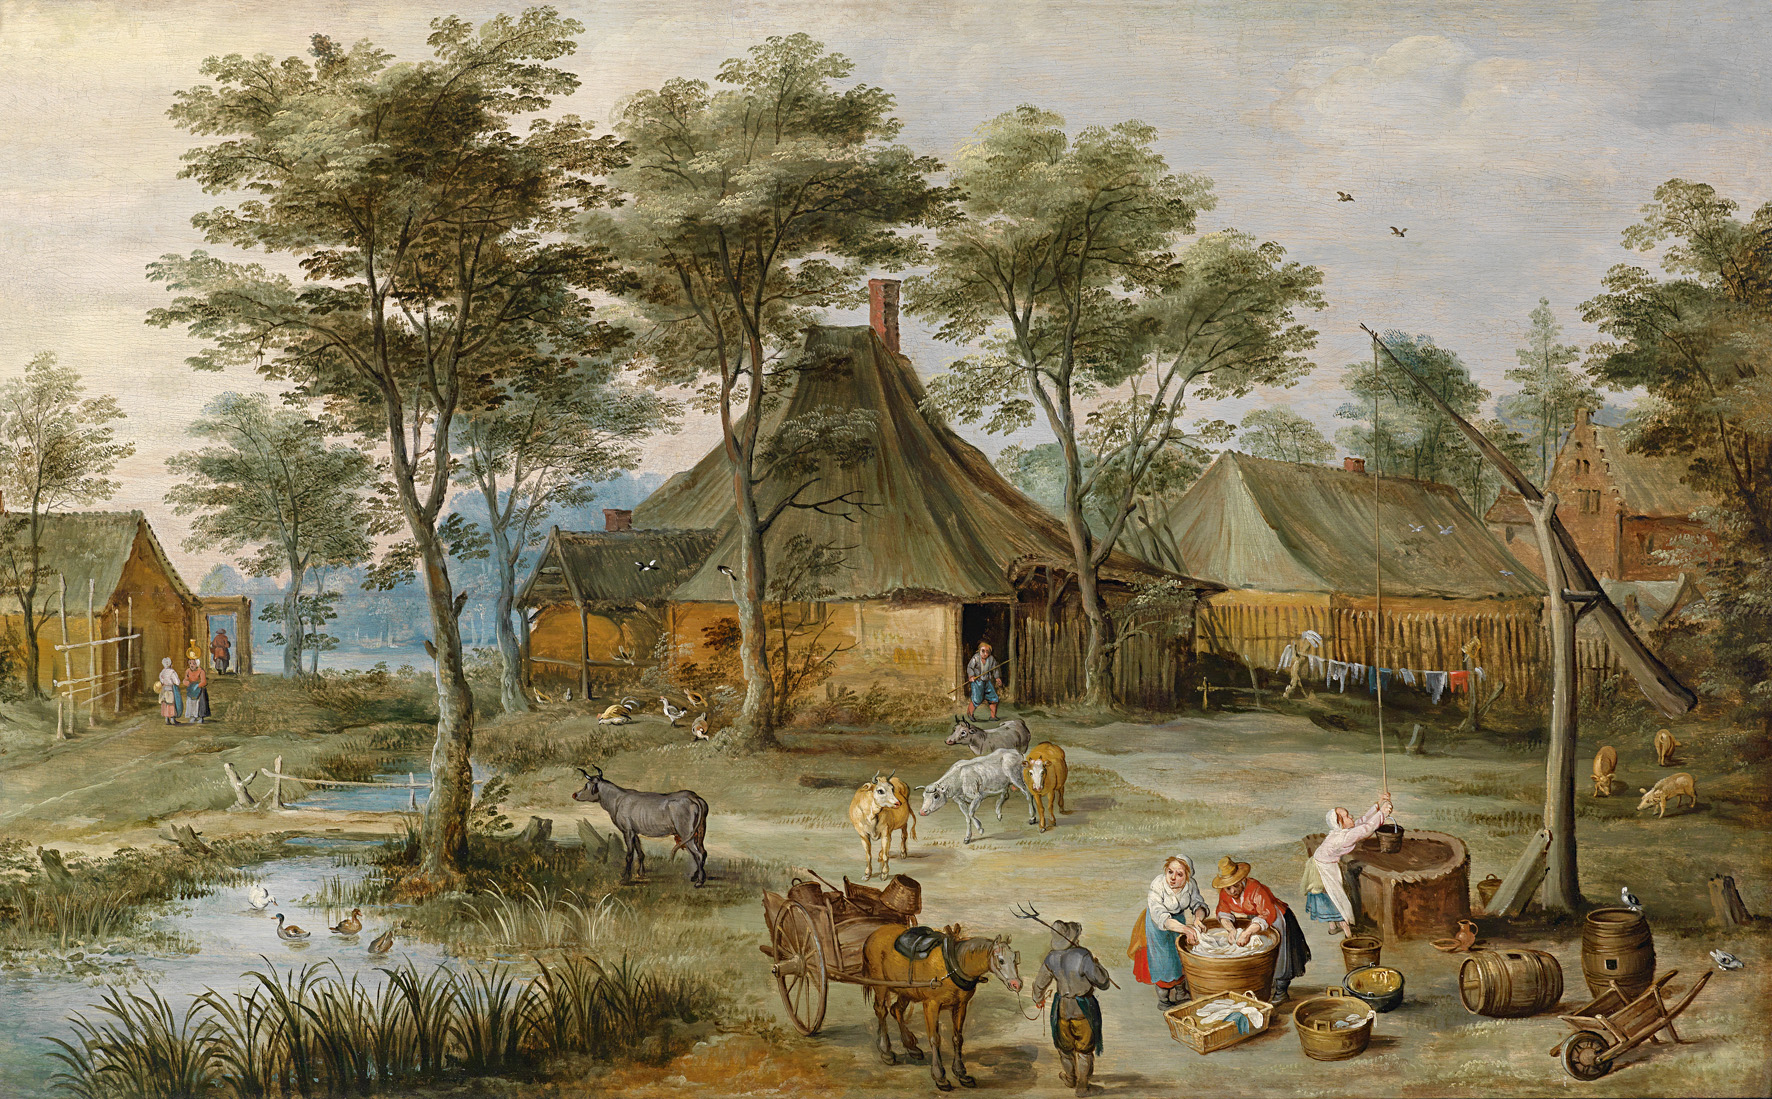 Auction Week Of Many Faces - Village Scene By The Well - HD Wallpaper 